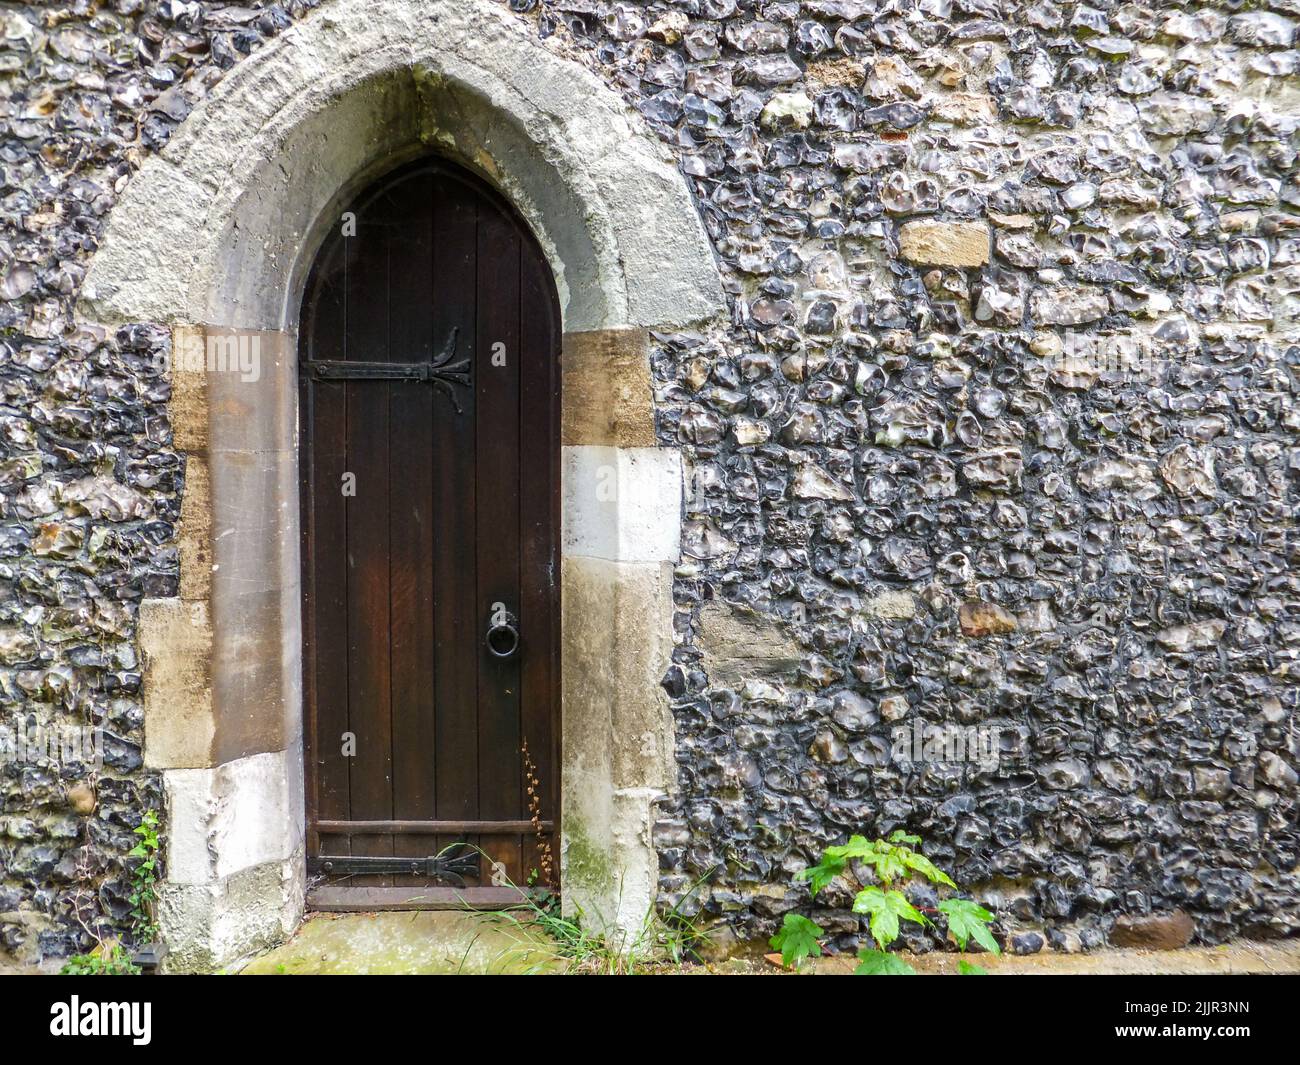 An old wooden door at historic St. Mary the Virgin Church in Harmondsworth, Hillingdon, Middlesex, London, England, UK. Stock Photo